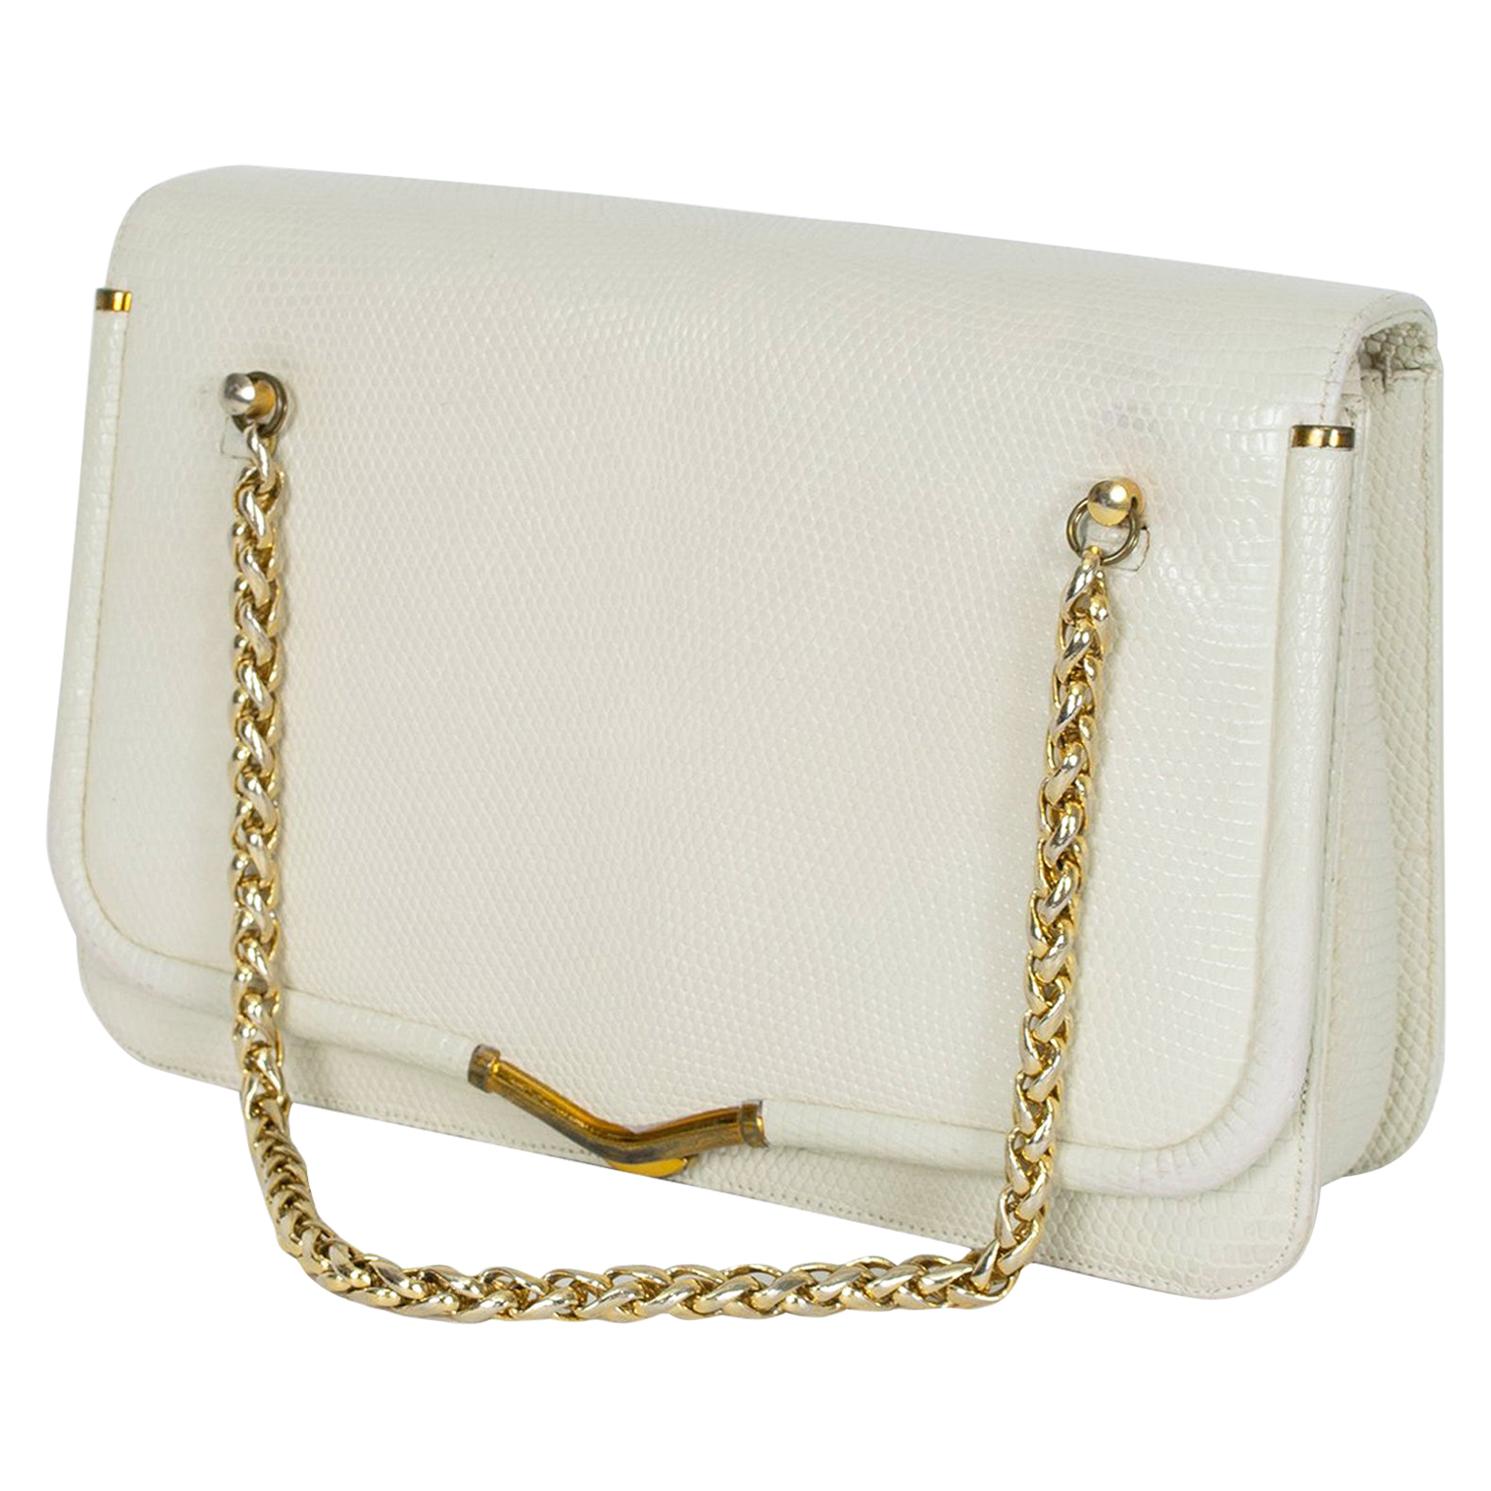 Judith Leiber Ivory Lizard Compartment Purse with Gold Chain Handles, 1980s For Sale